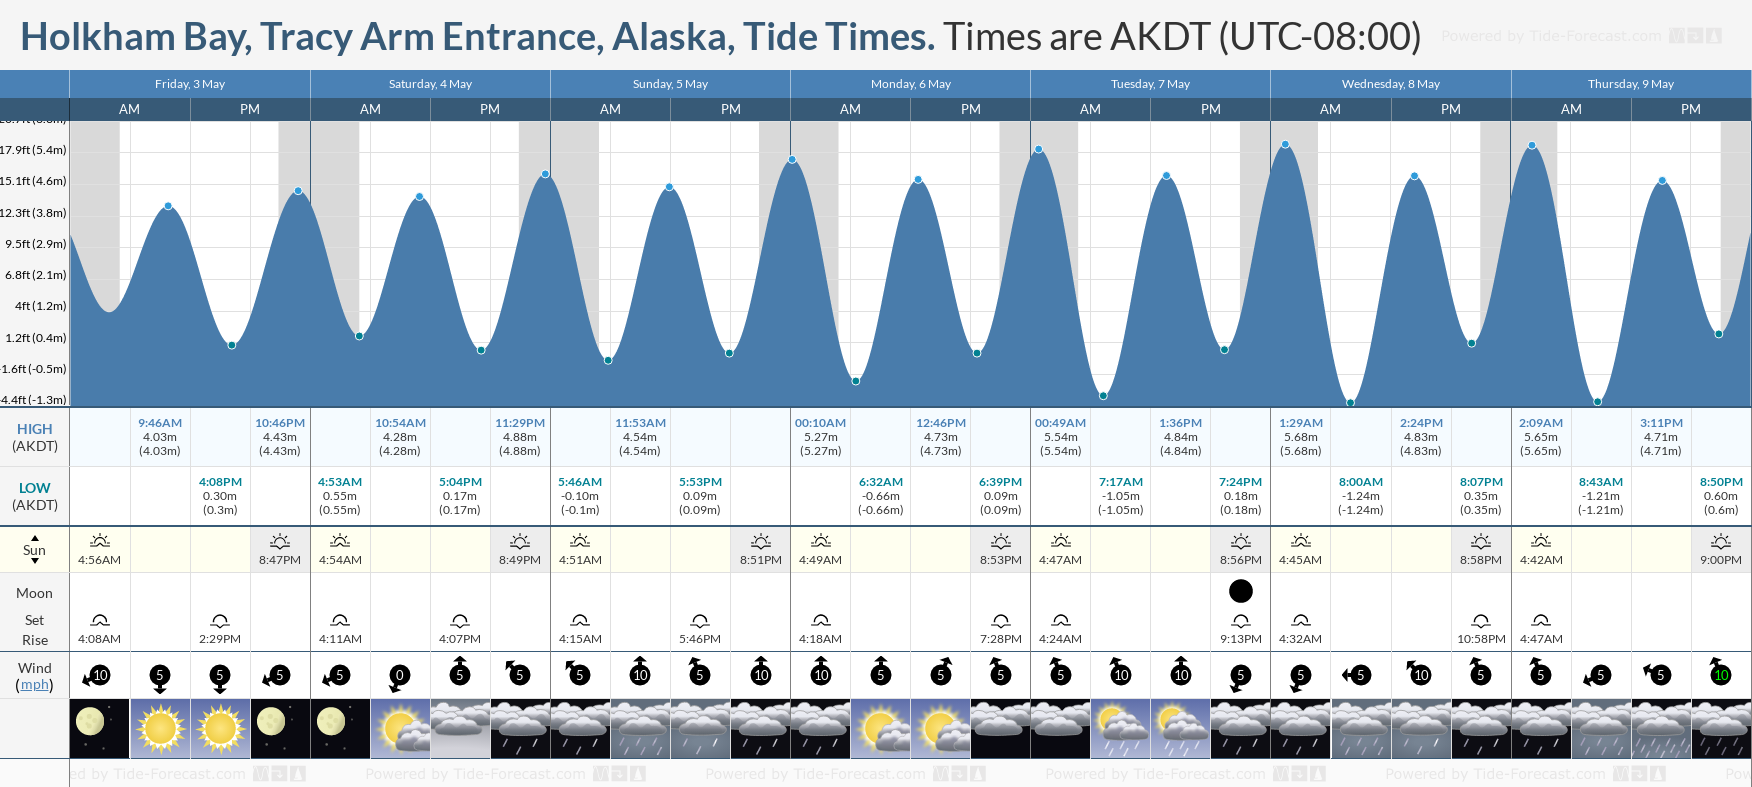 Holkham Bay, Tracy Arm Entrance, Alaska Tide Chart including high and low tide times for the next 7 days